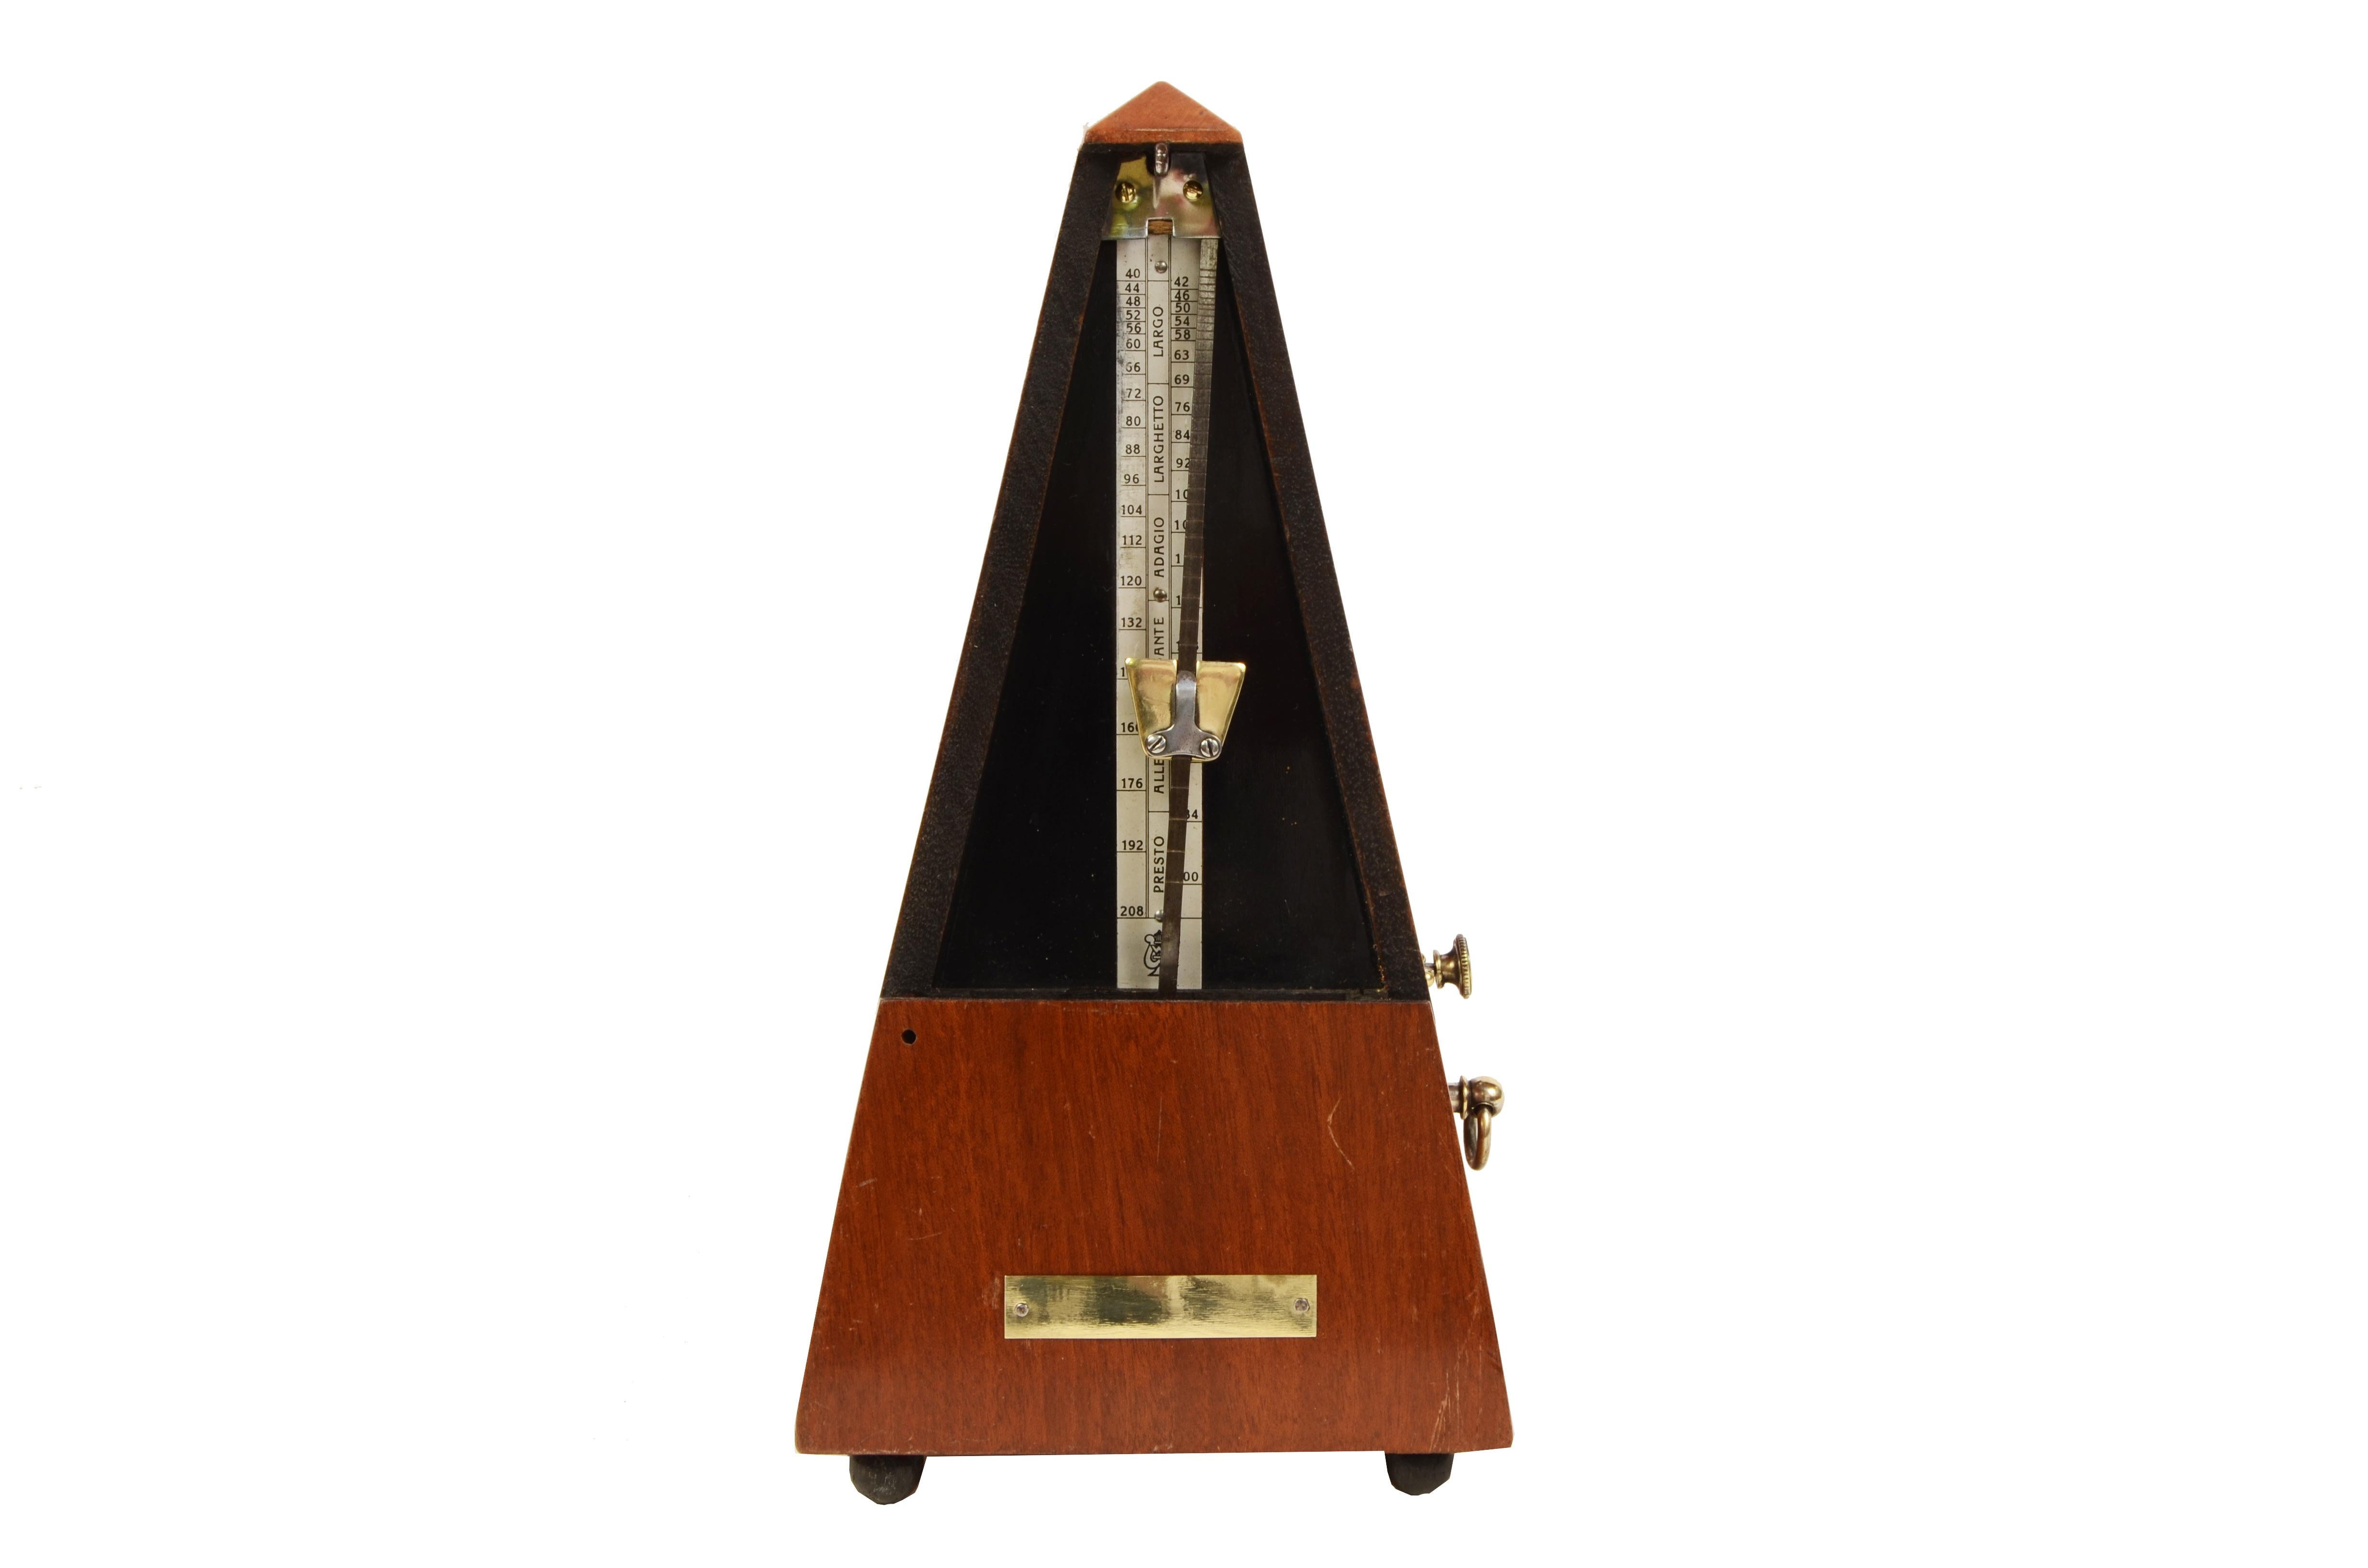 Metronome system Johan Maelzel (1772-1838) from the late 19th century. It is an instrument used to measure the Tempo of music, the sound of the pendulum indicates the exact speed of execution. 
The instrument consists of a pendulum with a